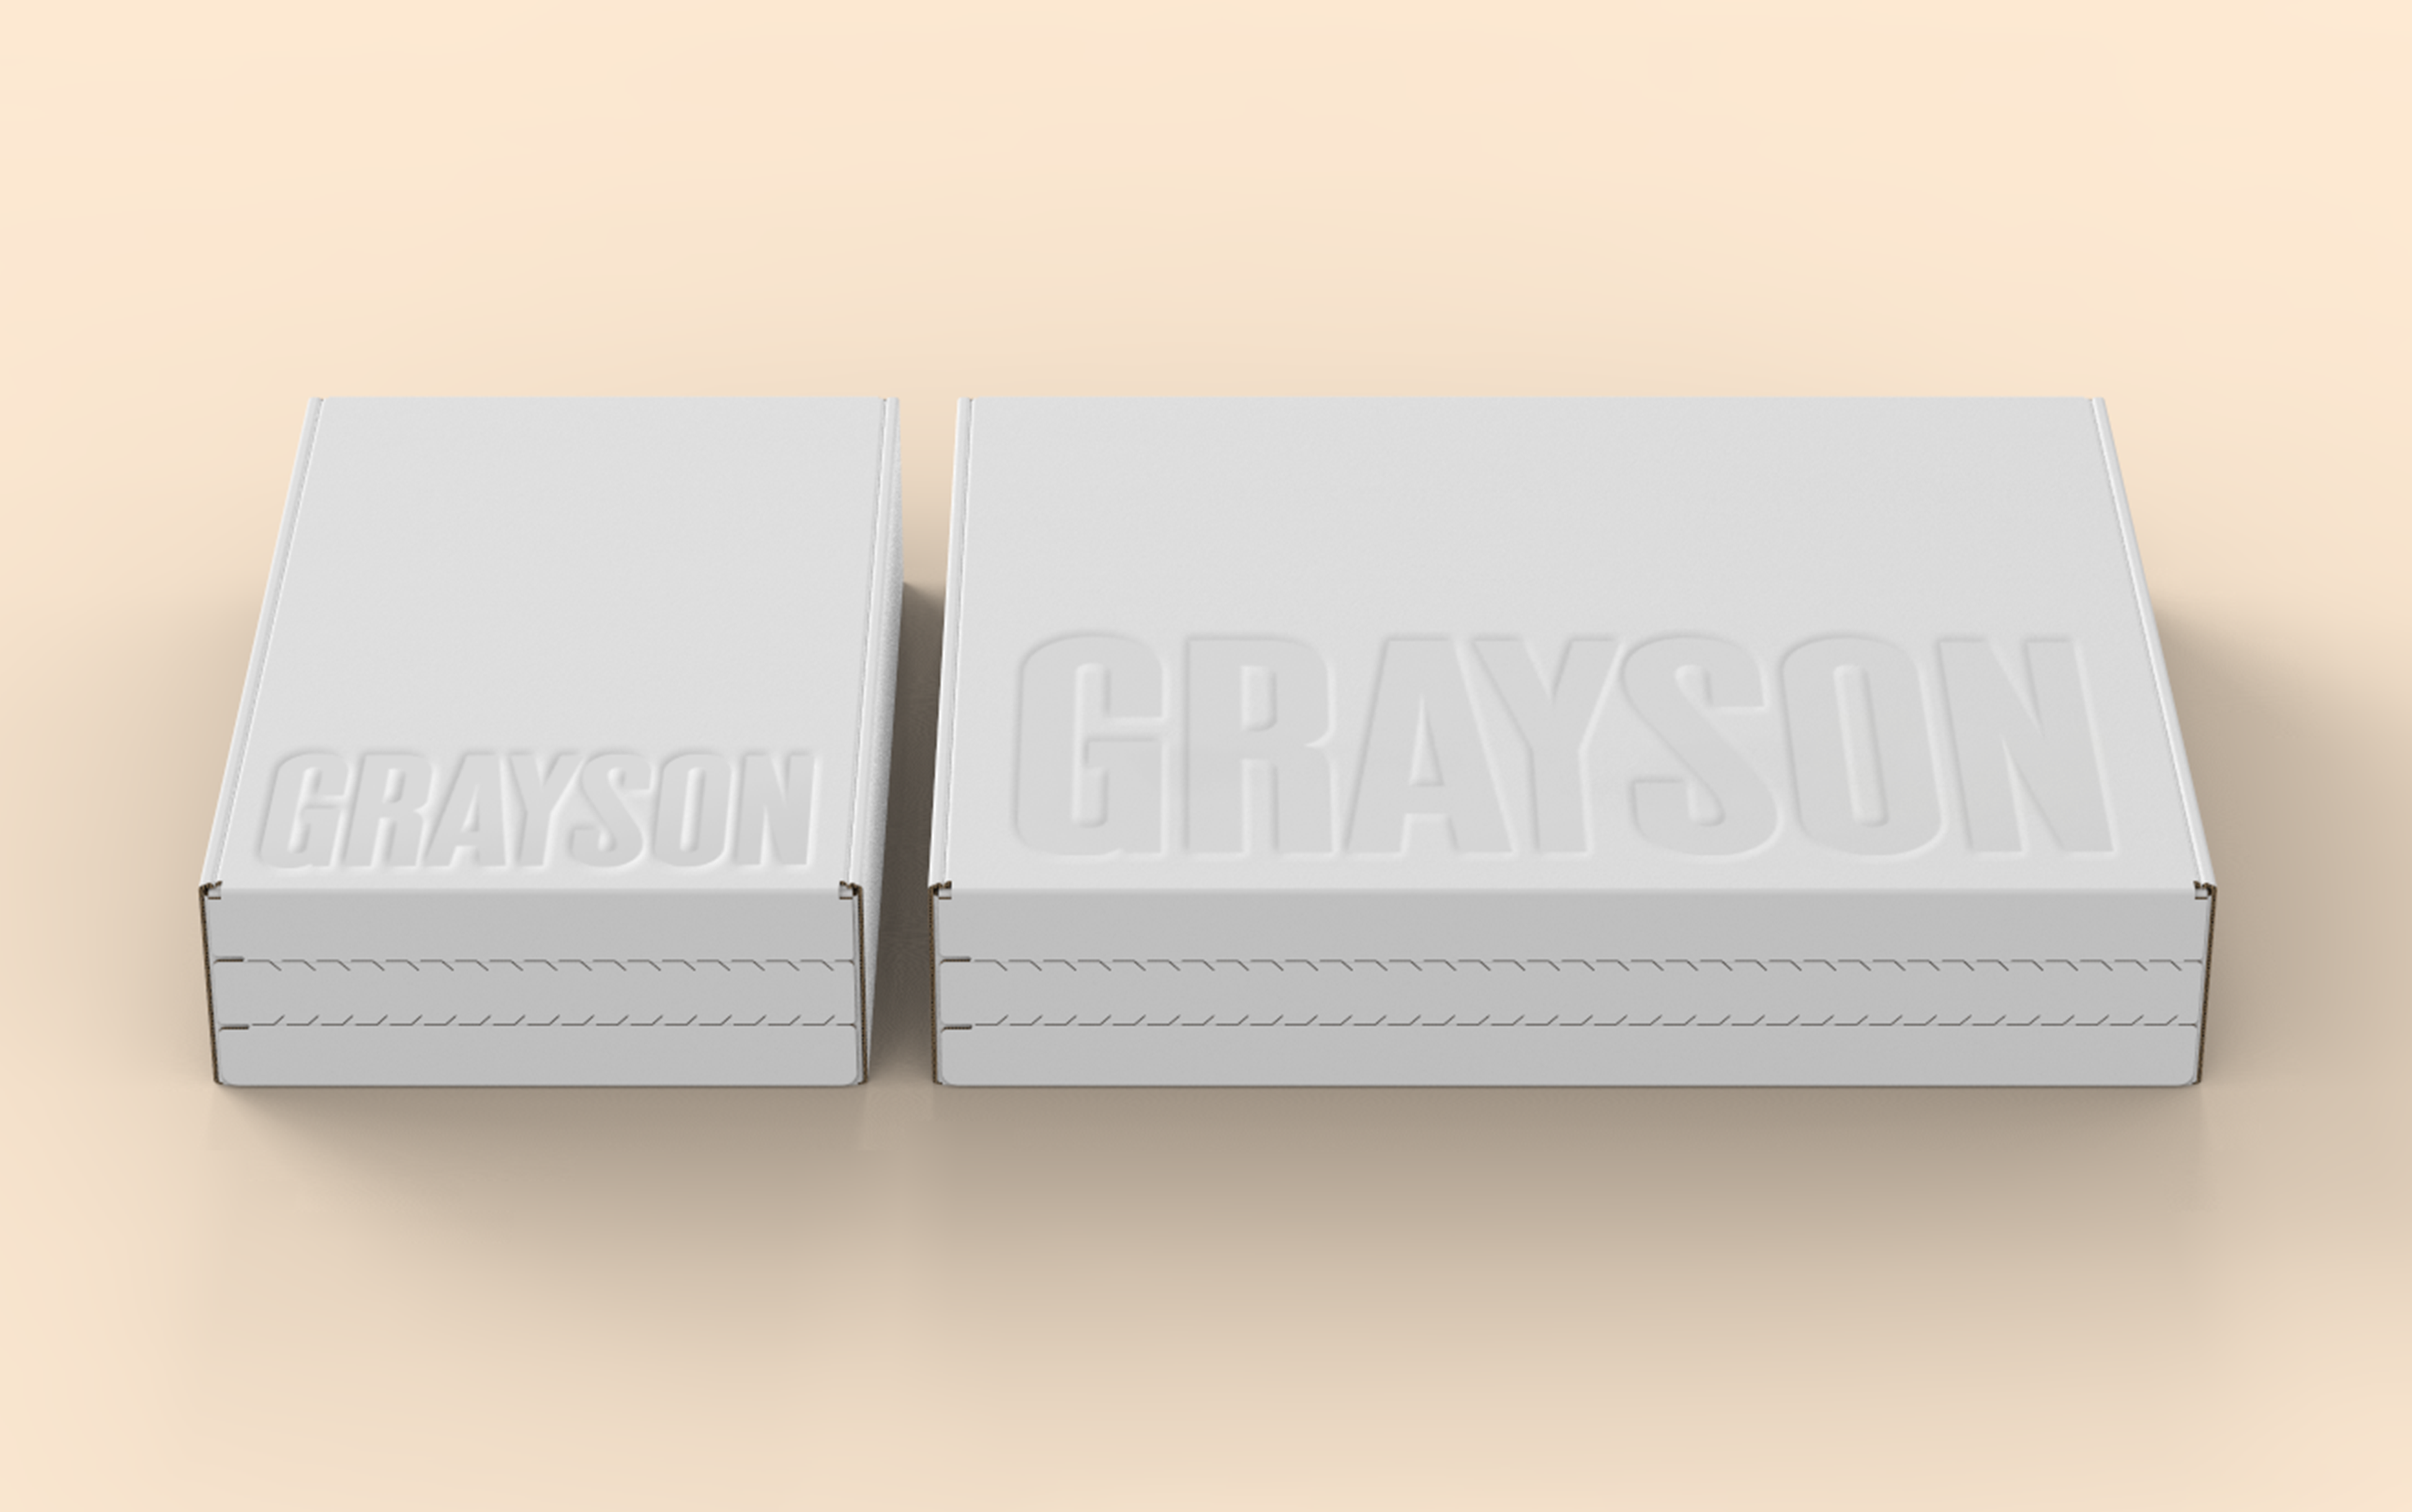 06_Grayson_Packaging